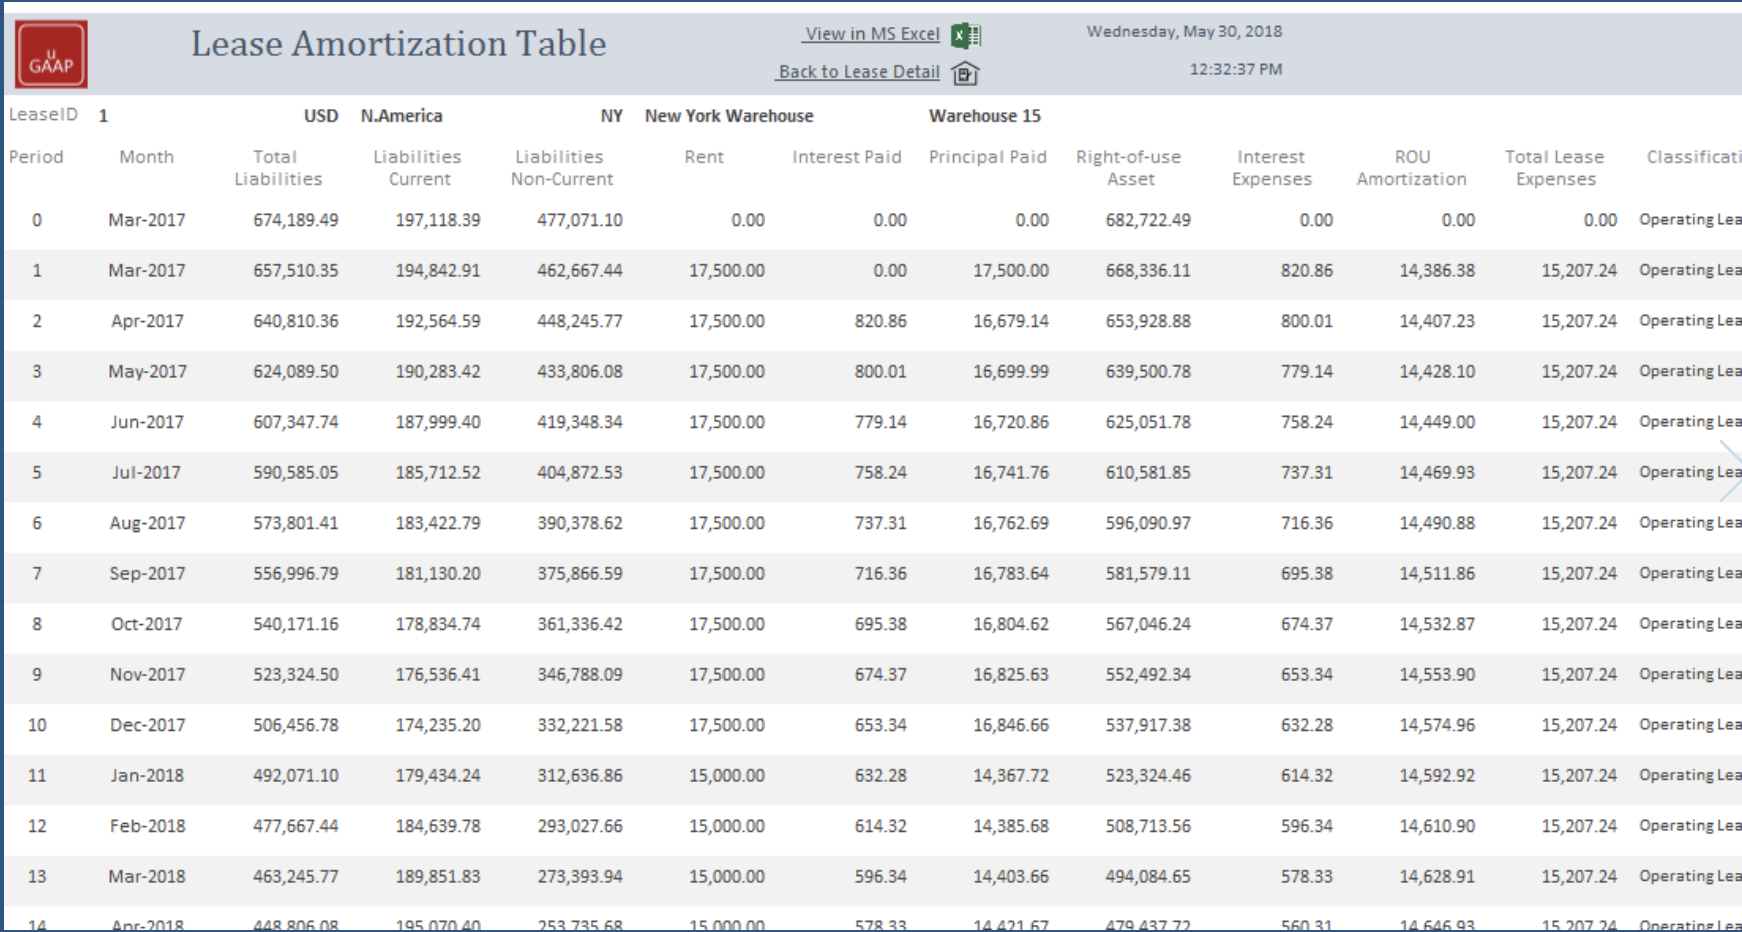 Lease amortization table